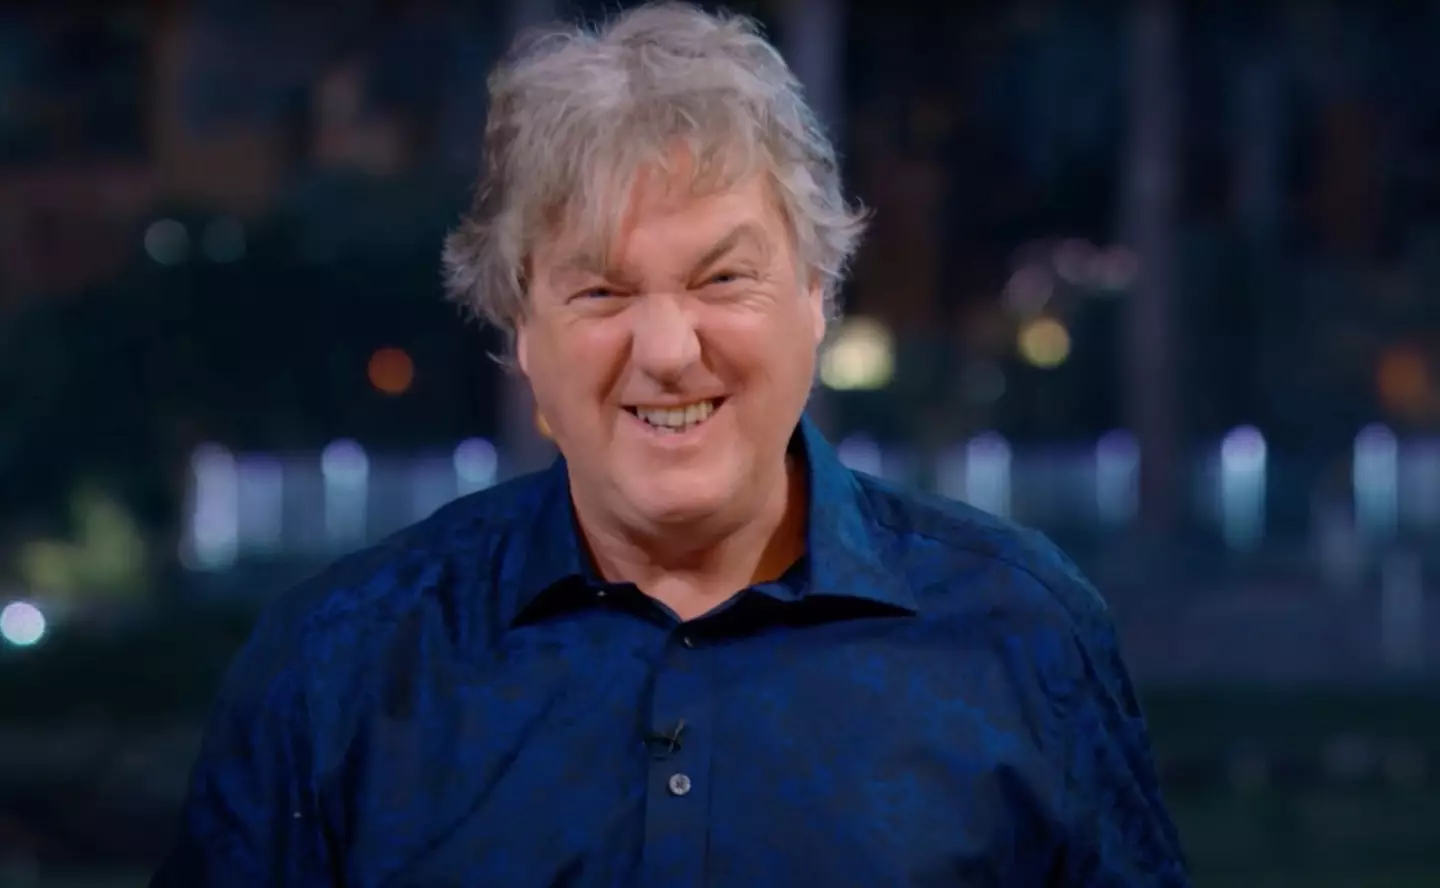 James May's priceless reaction.